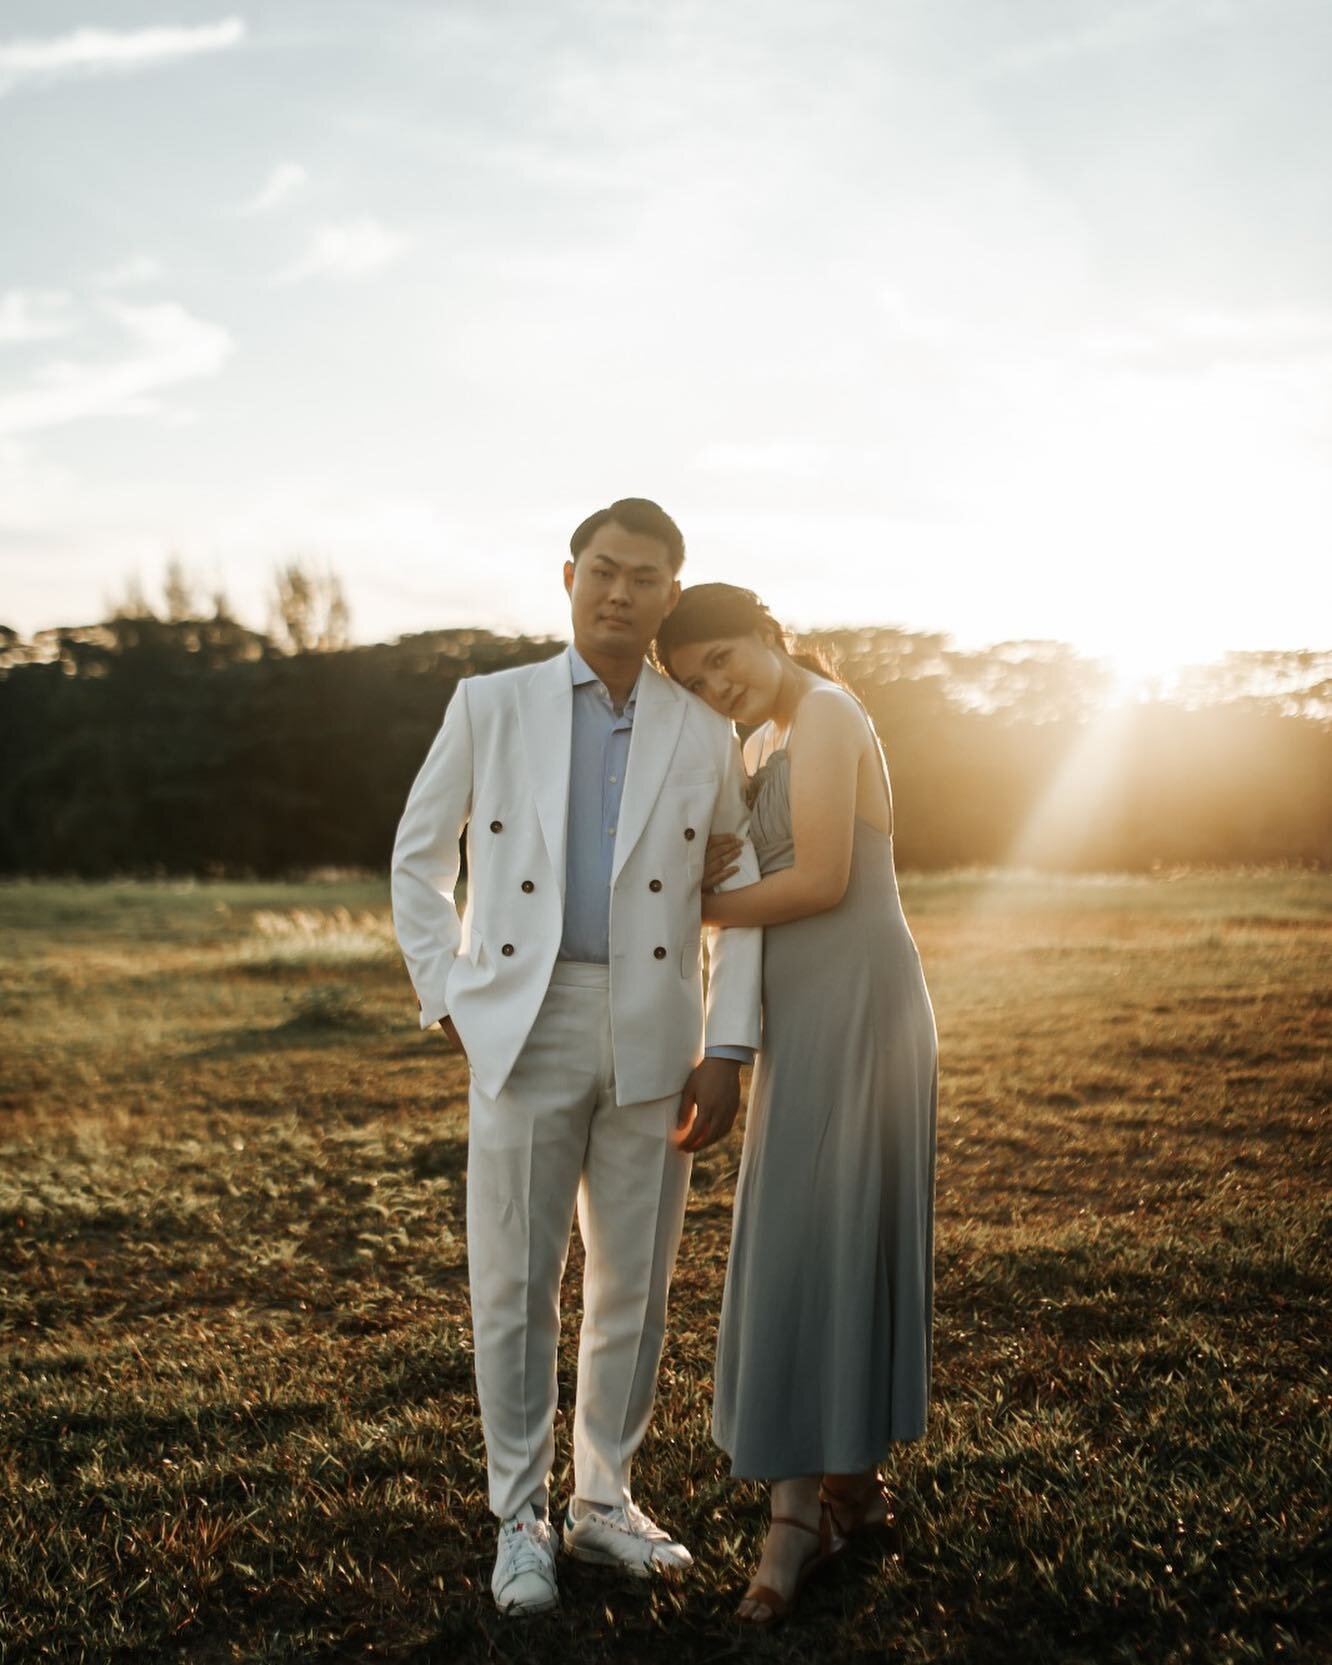 [Giveaway] Introducing @arielle_breadandbutterworks! We are giving away a 1.5 hours introductory shoot next Friday (9 Dec 2022) from 5.30 - 7pm at one of our favourite Pre-wedding locations - Canterbury Road. This will be the final exam for Arielle b